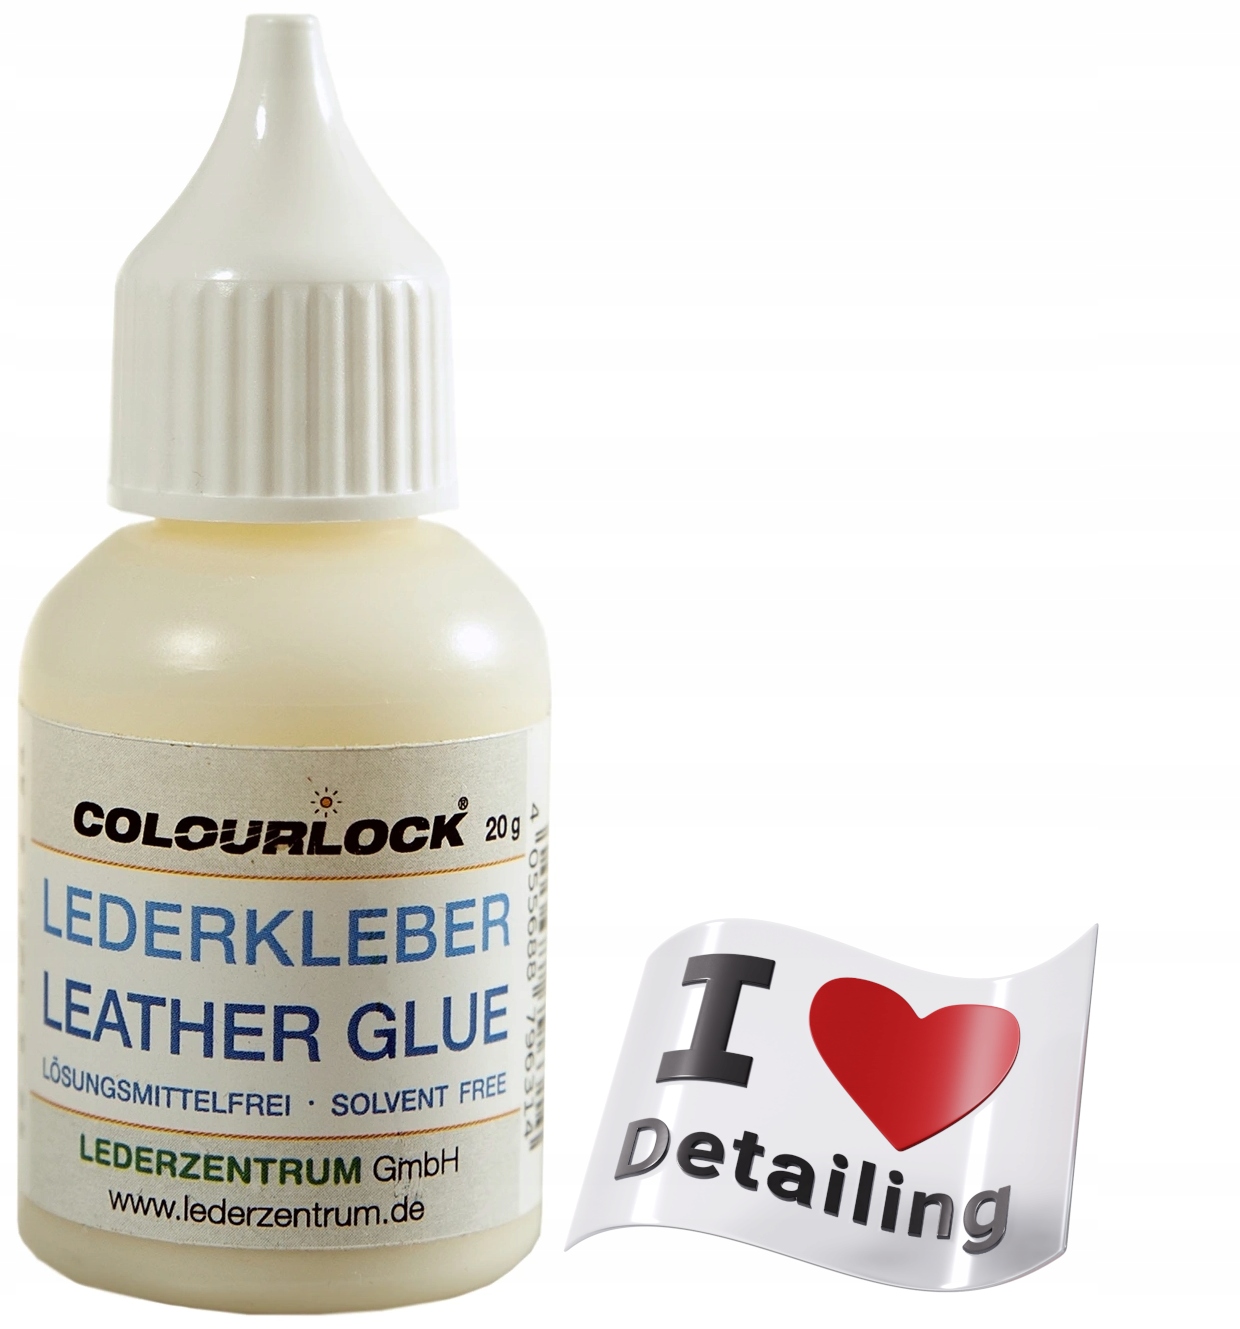 Leather Glue solvent free